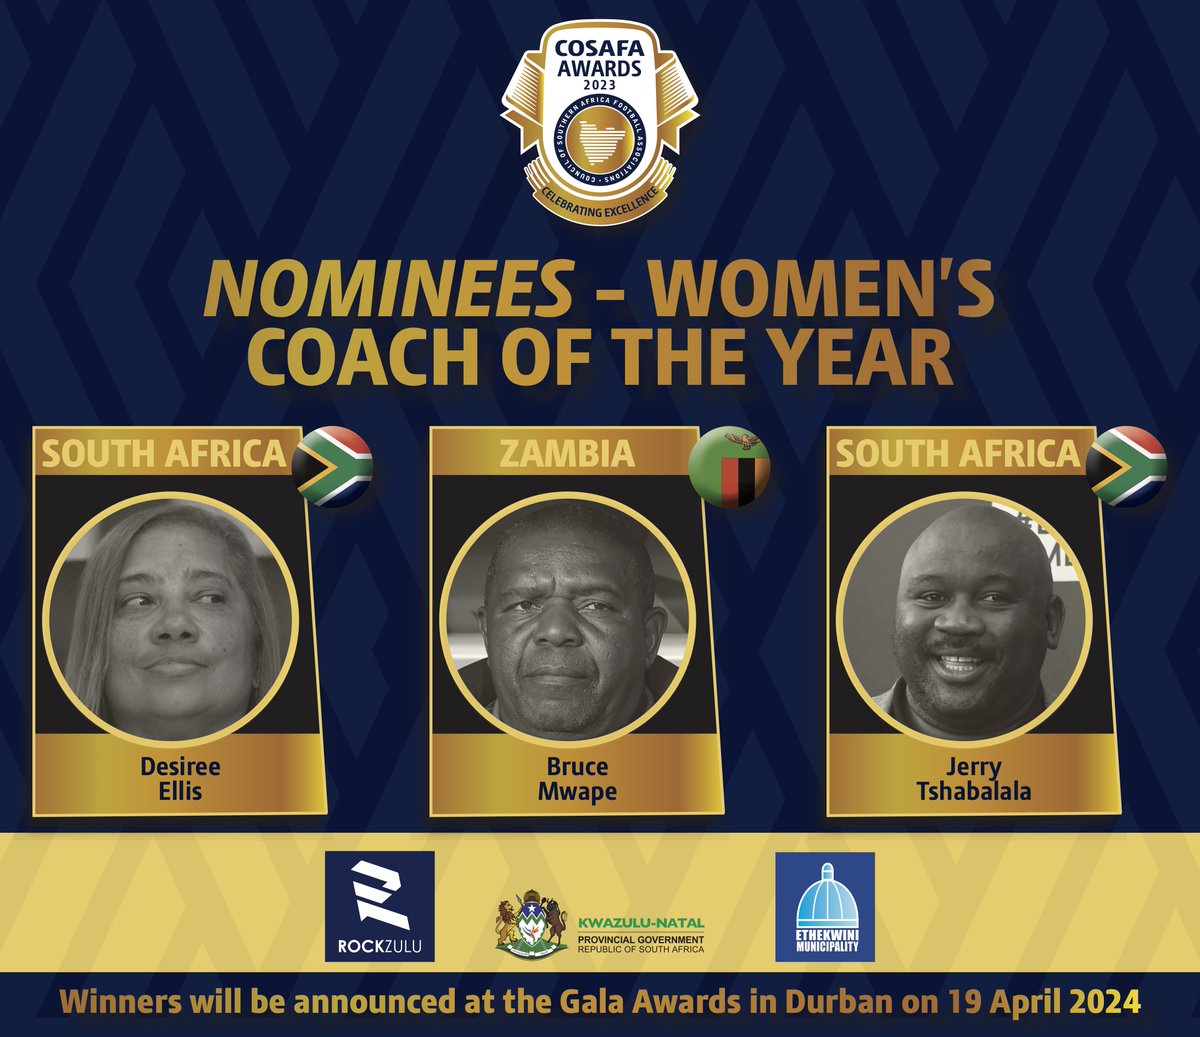 The nominees for the category of the Women’s Coach of the Year at the inaugural 2023 #COSAFAAwards have been unveiled. The winner will be announced at a gala awards ceremony in Durban on April 19. Read more: tinyurl.com/3jurjetu